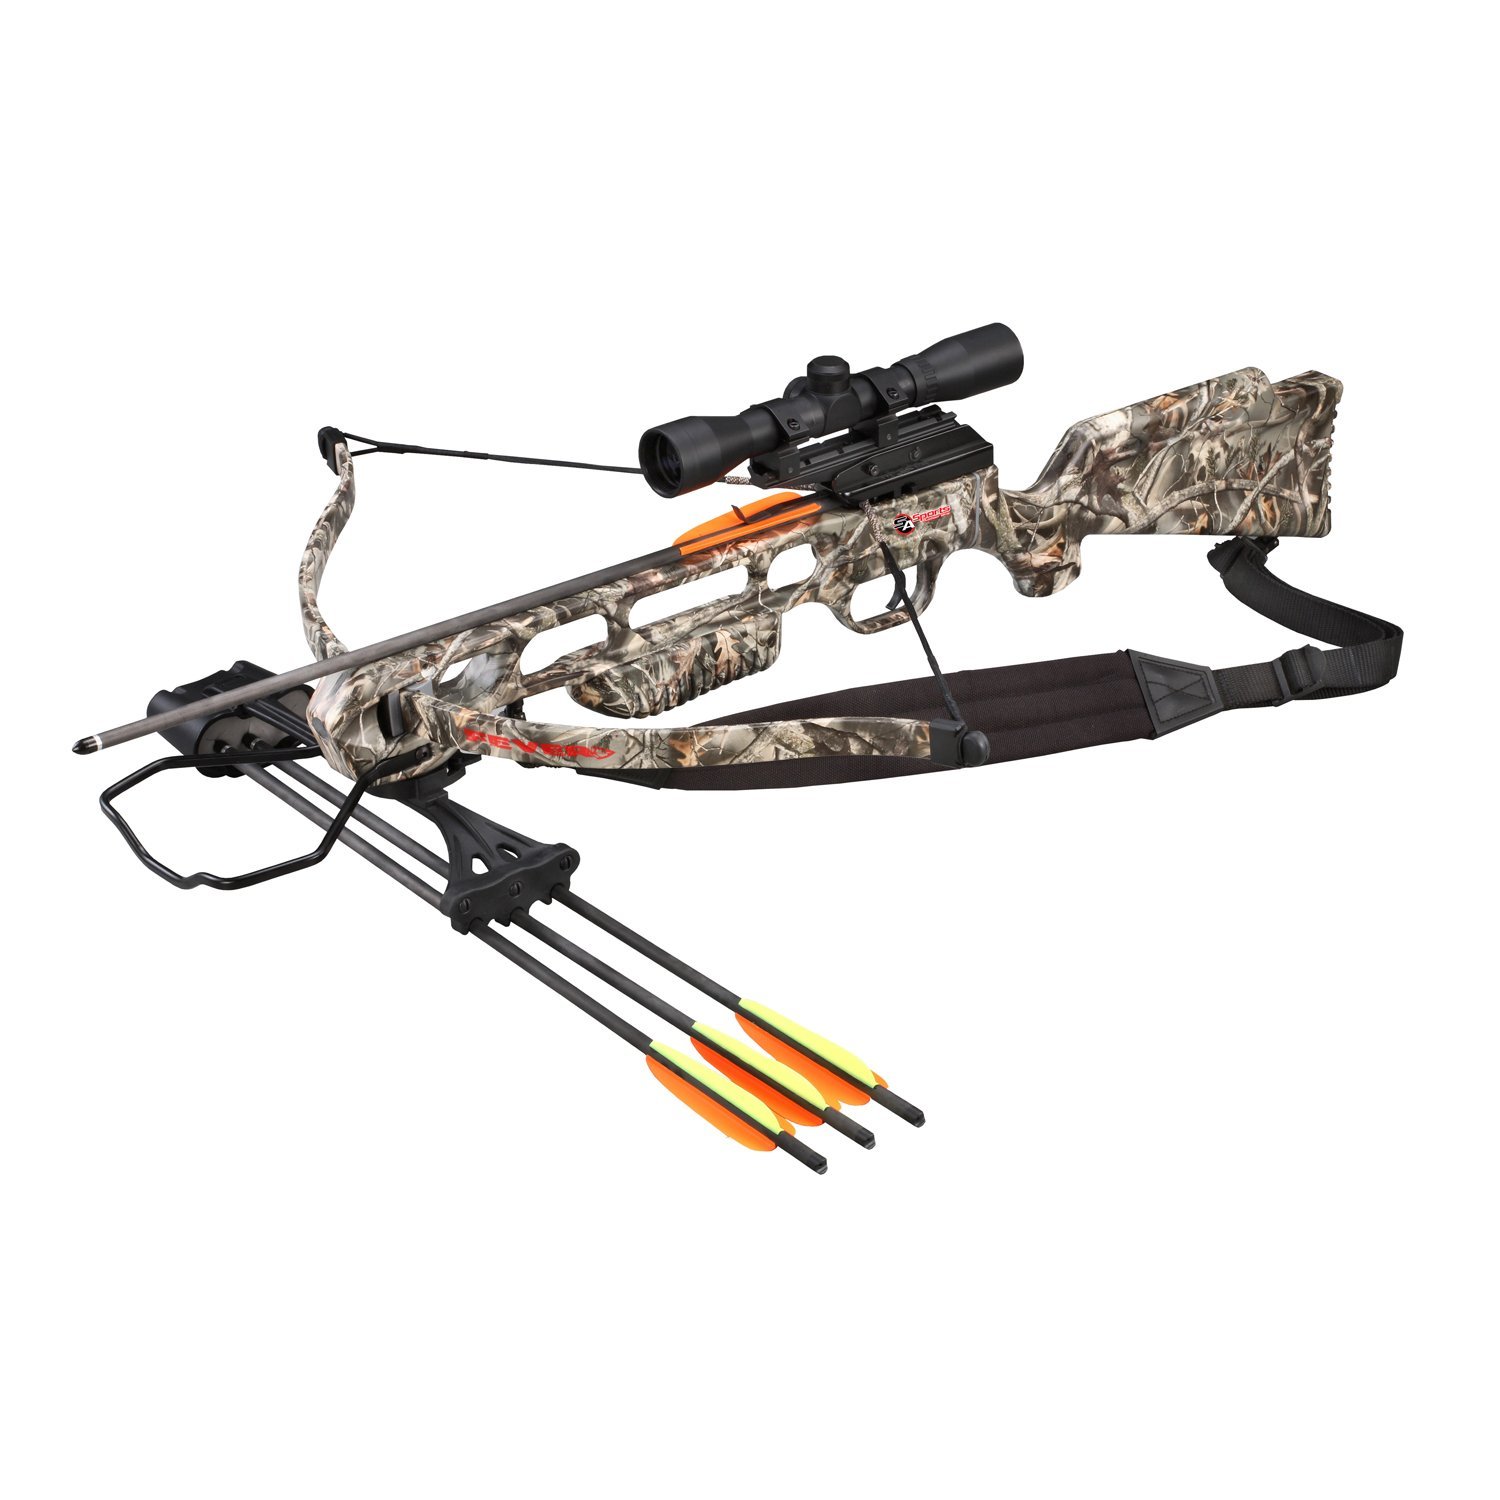 SA SPORTS FEVER CROSSBOW PACKAGE RECURVE STYLE W/SCOPE